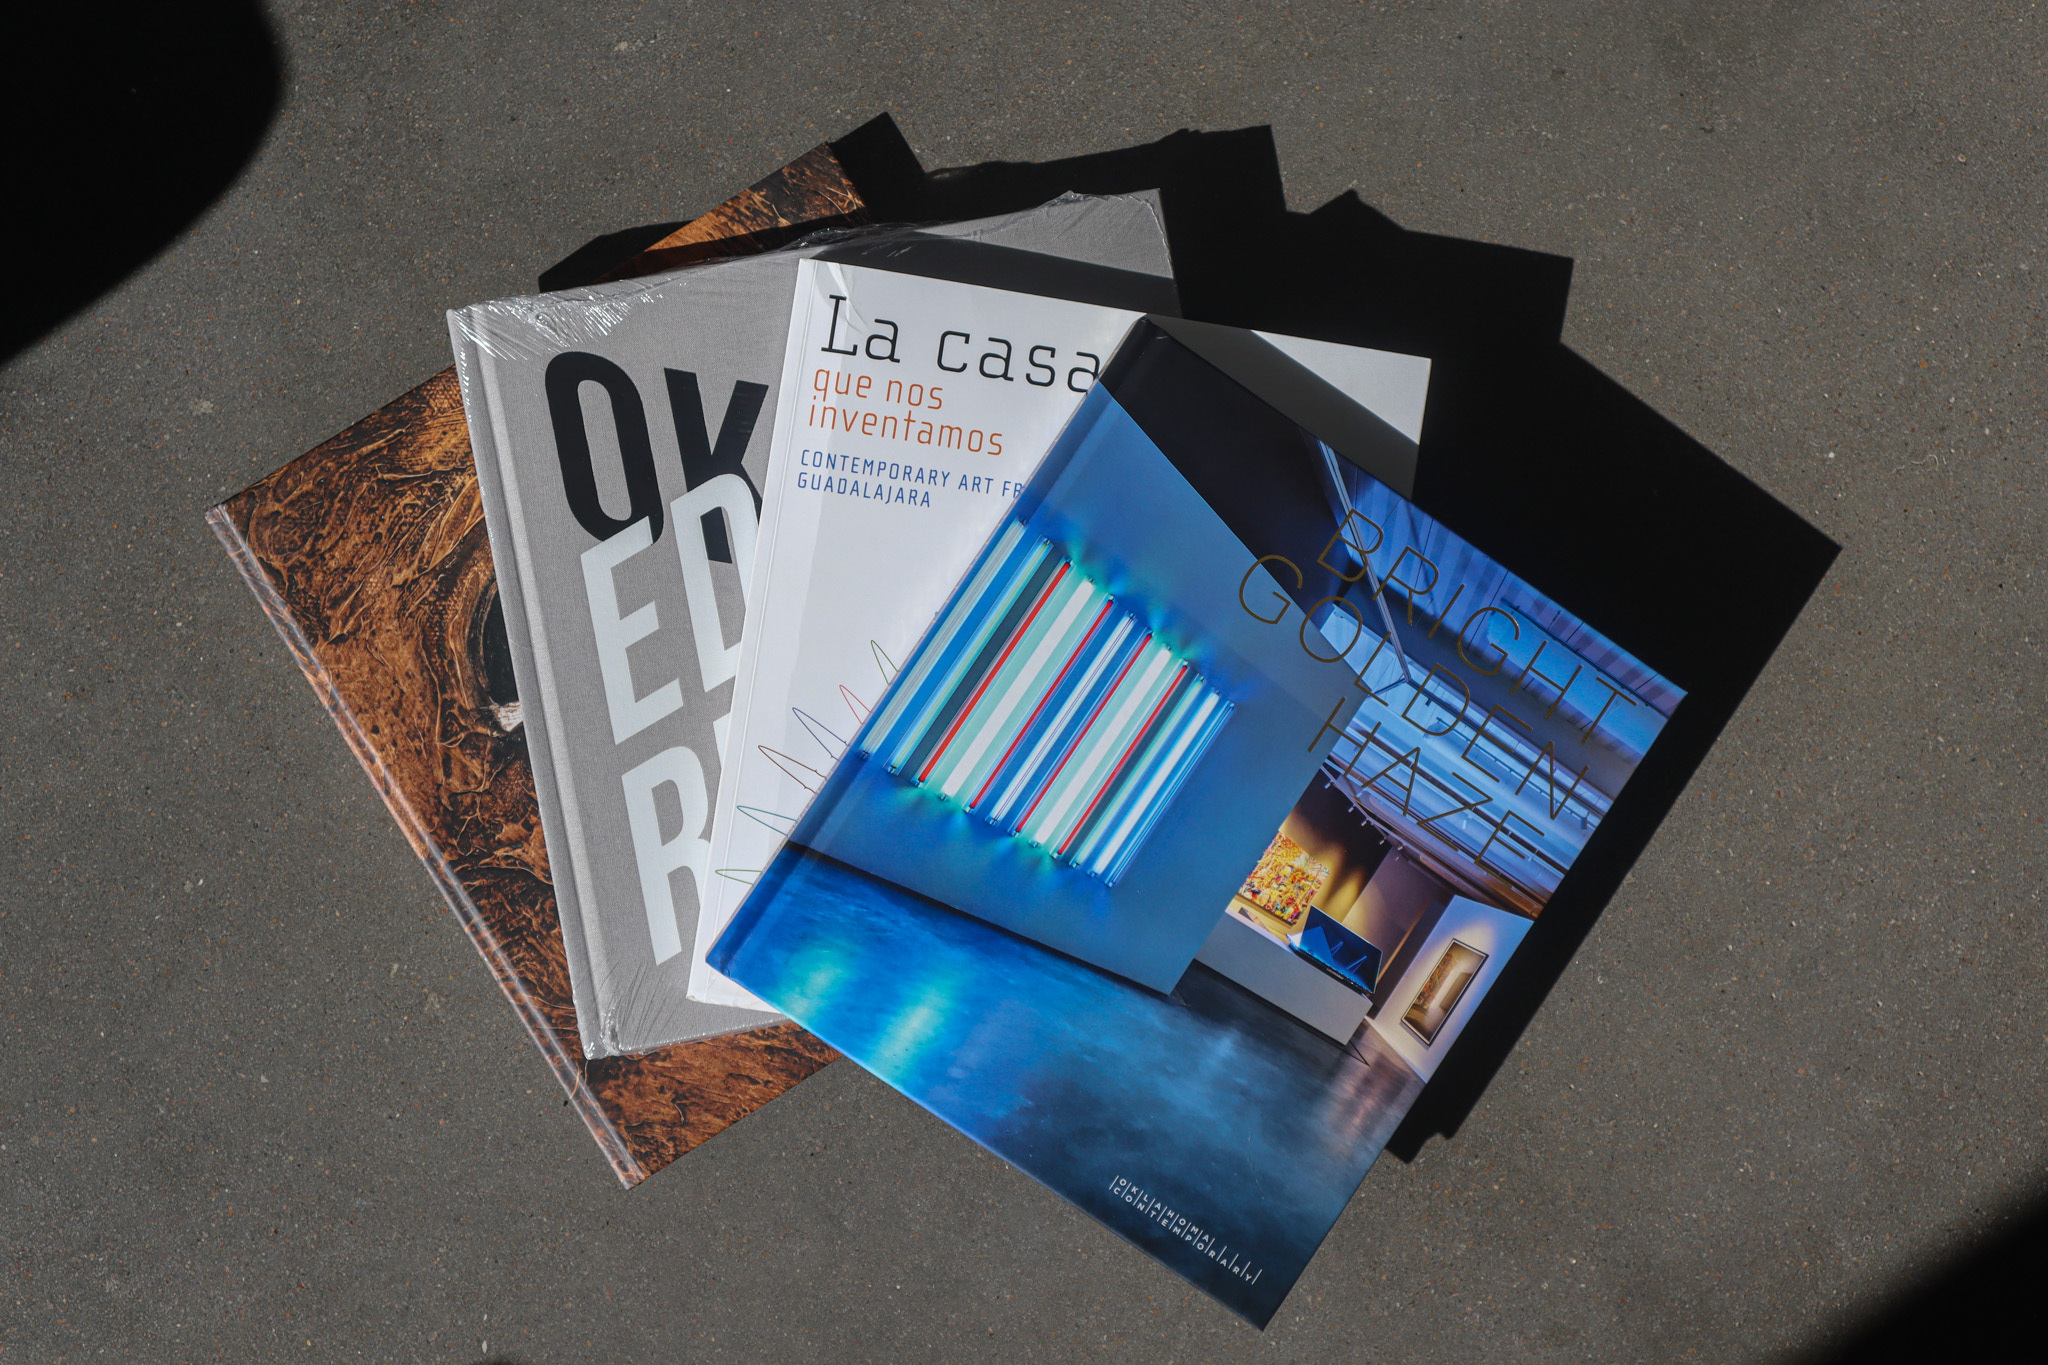 Four exhibition catalogs lay on a cement surface. They are stacked on top of each other, fanned out. The top book shows a blue hued installation with the words BRIGHT GOLDEN HAZE written on the cover in gold